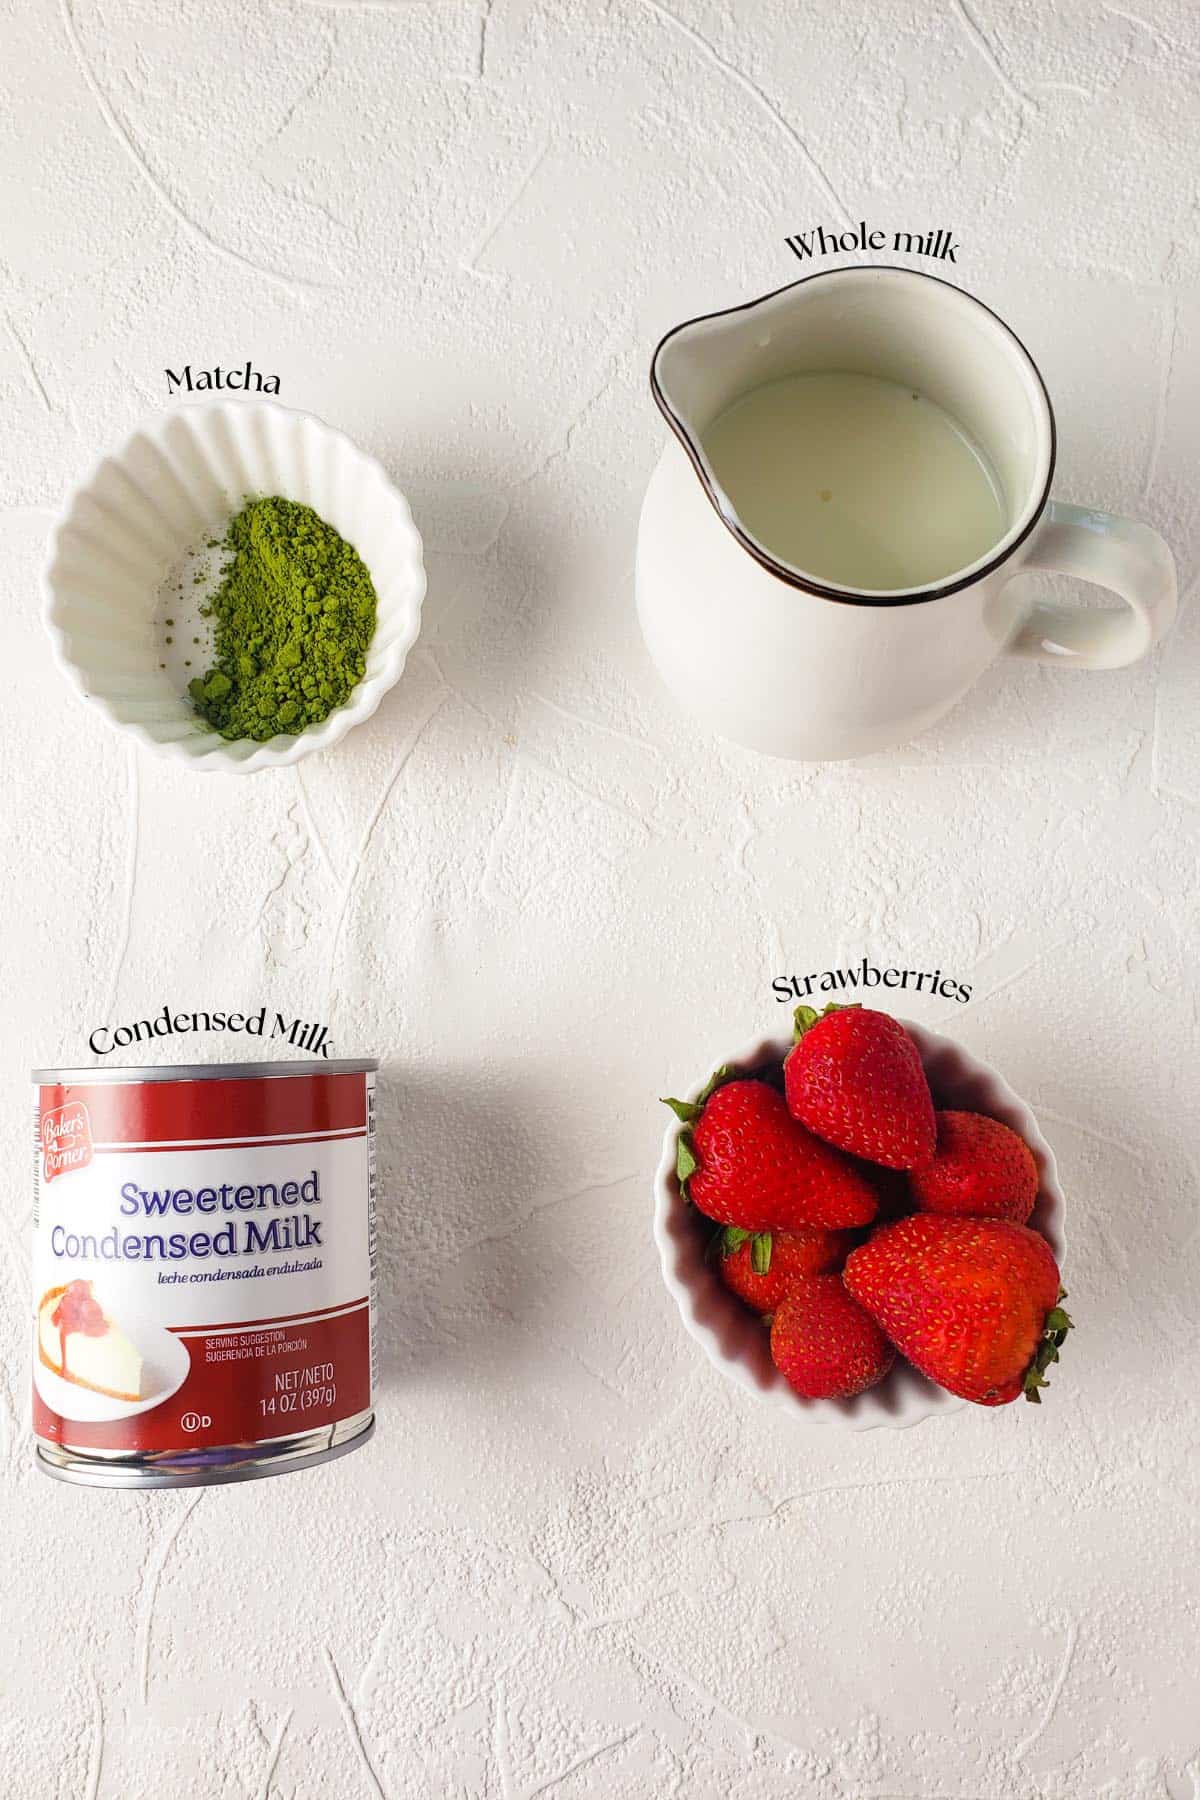 image showing all the ingredients required to make matcha with strawberry